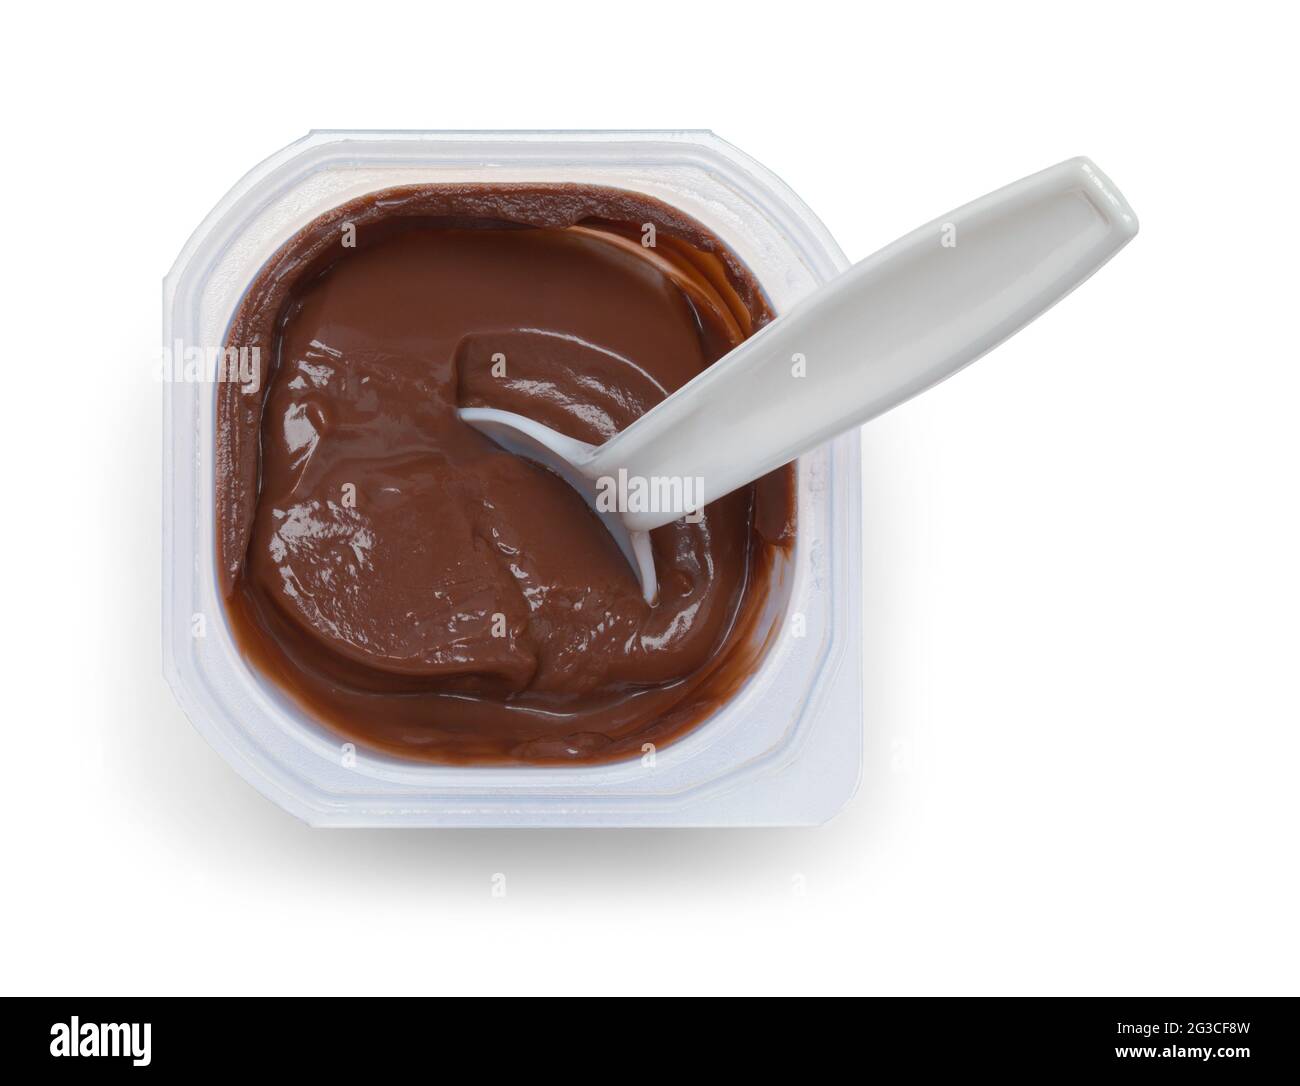 Open Chocolate Pudding Cup Cut Out on White. Stock Photo